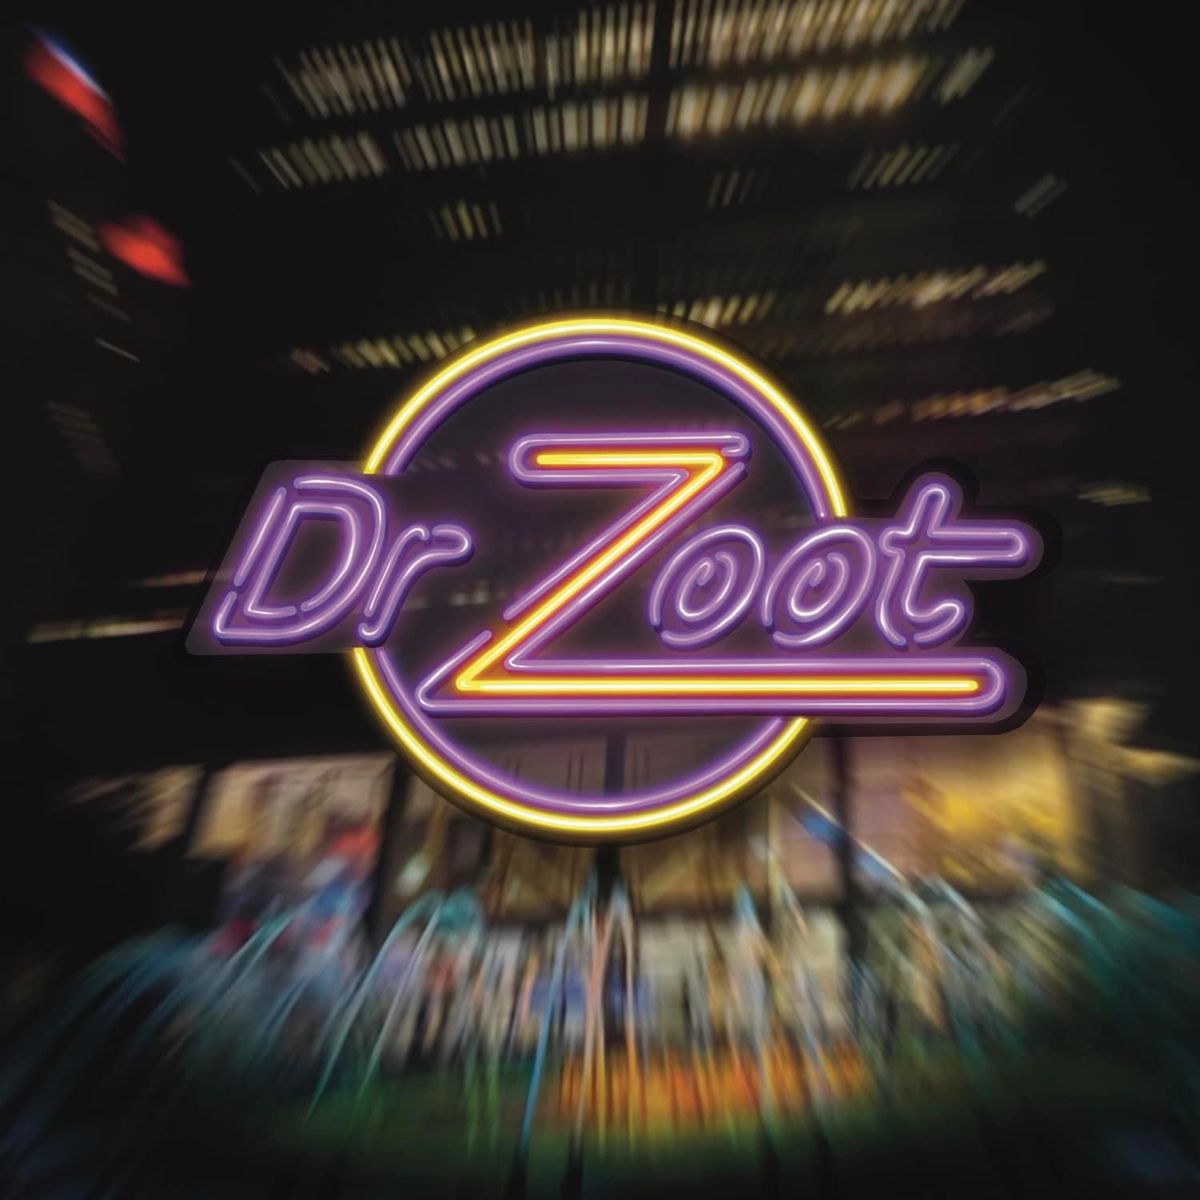 Dr. Zoot at The Pike!!